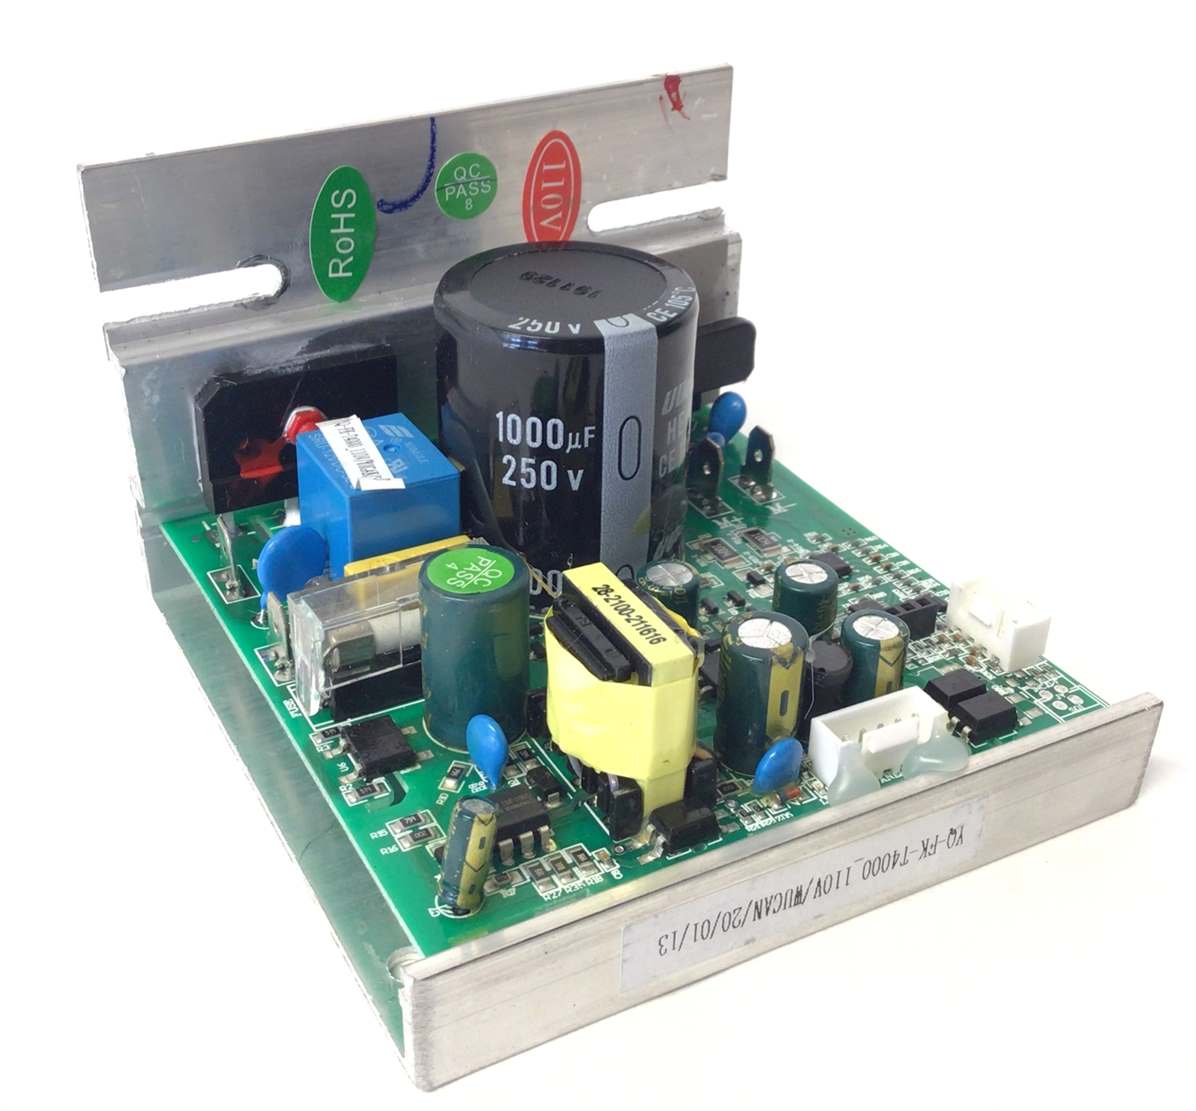 110v Lower Motor Control Board Controller (Used)